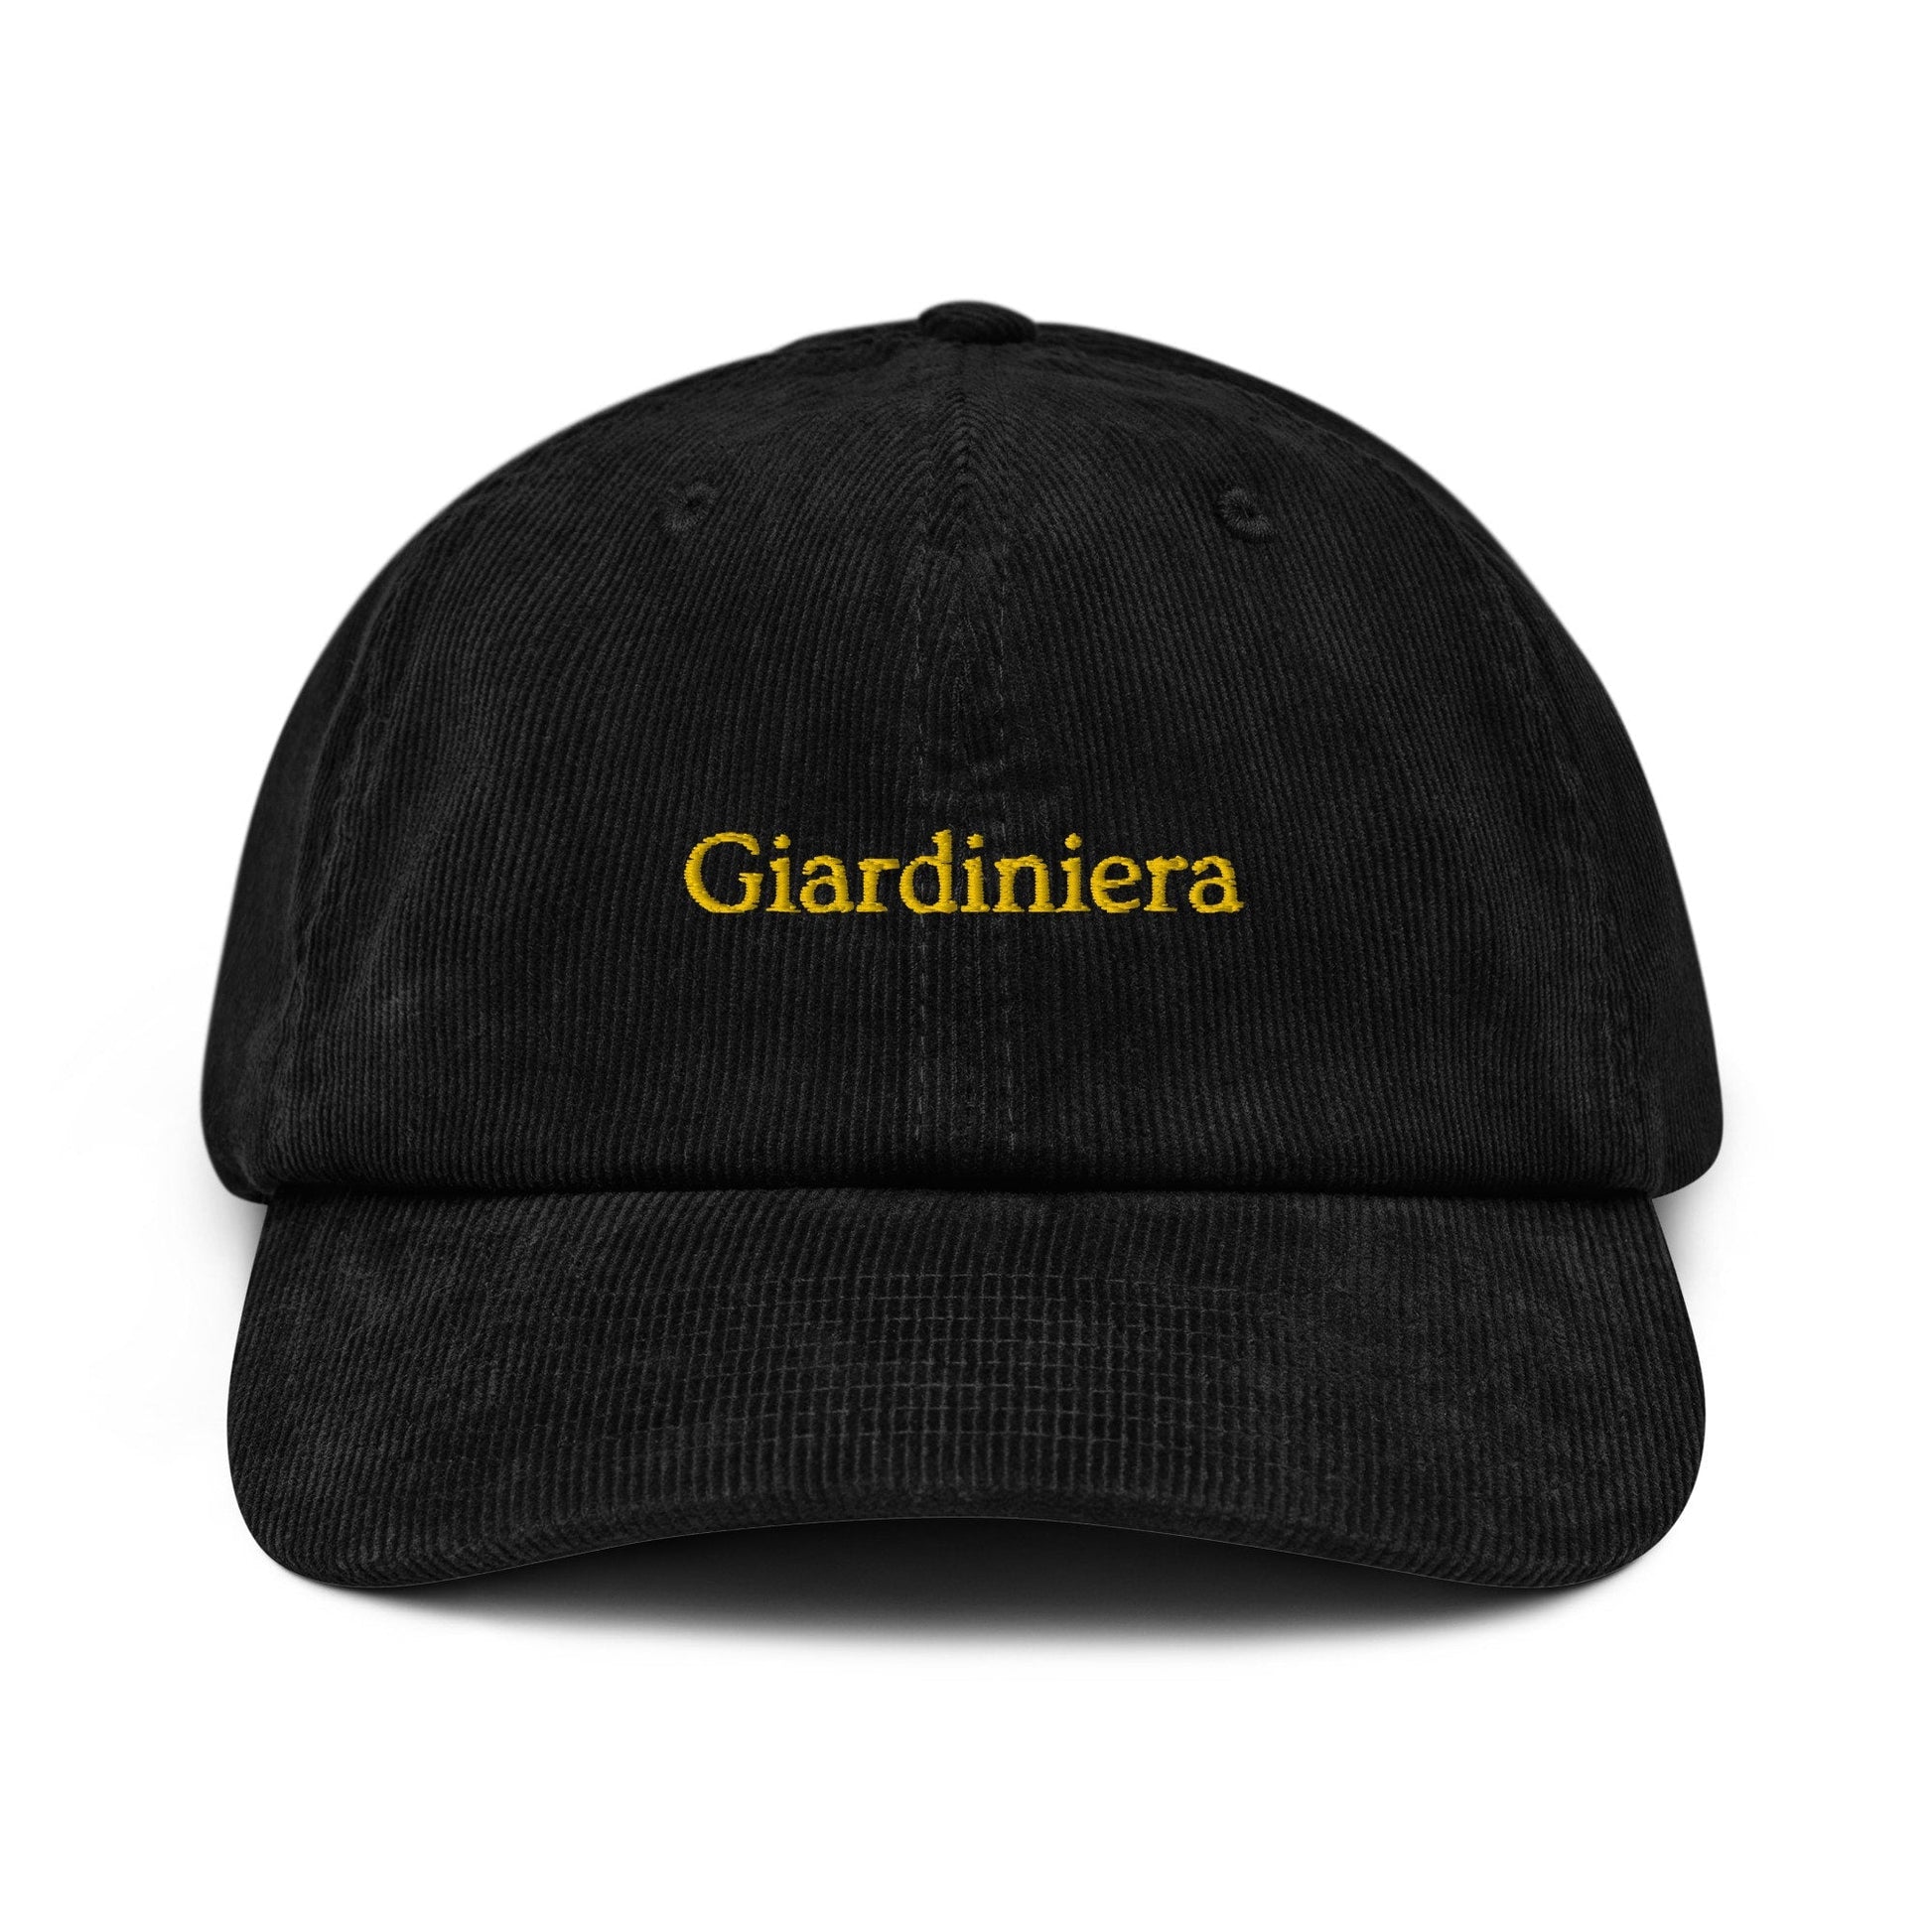 Giardiniera Corduroy Dad Hat - Gift for Italian charcuterie and cheese food Lovers - Handmade Embroidered Cap - Evilwater Originals